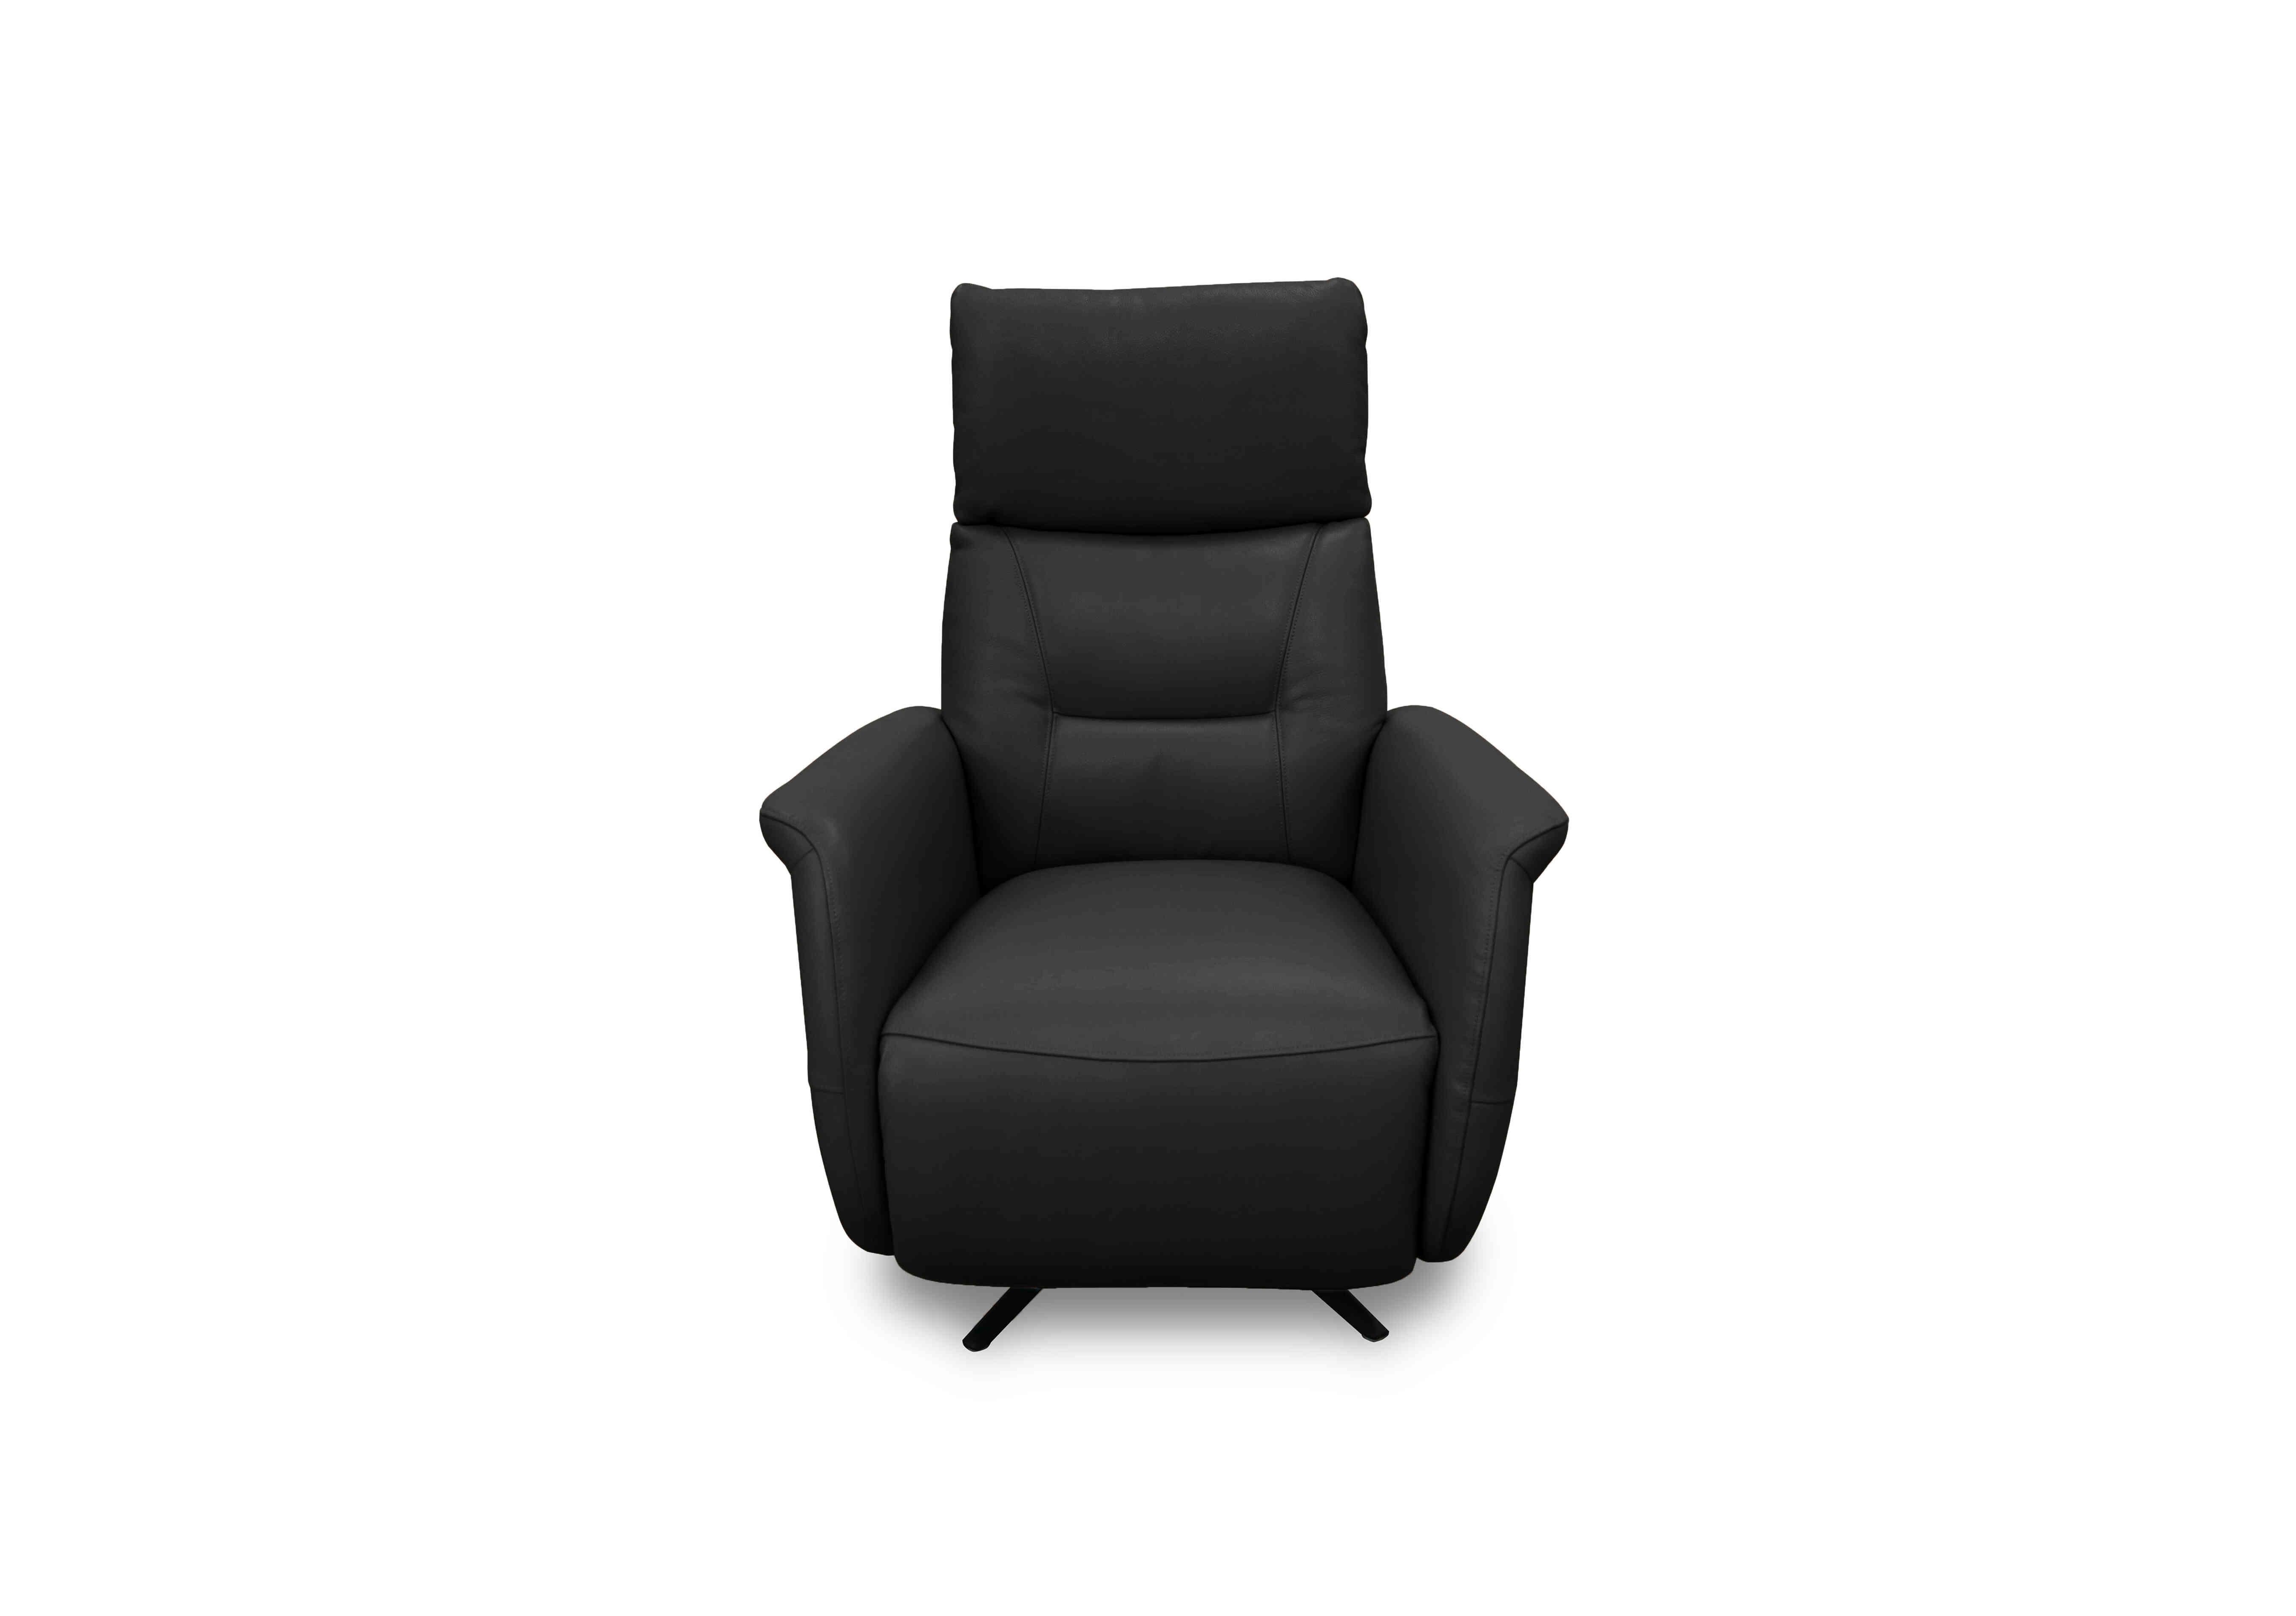 Designer Chair Collection Dusseldorf Leather Power Recliner Swivel Chair in Bv-3500 Classic Black on Furniture Village